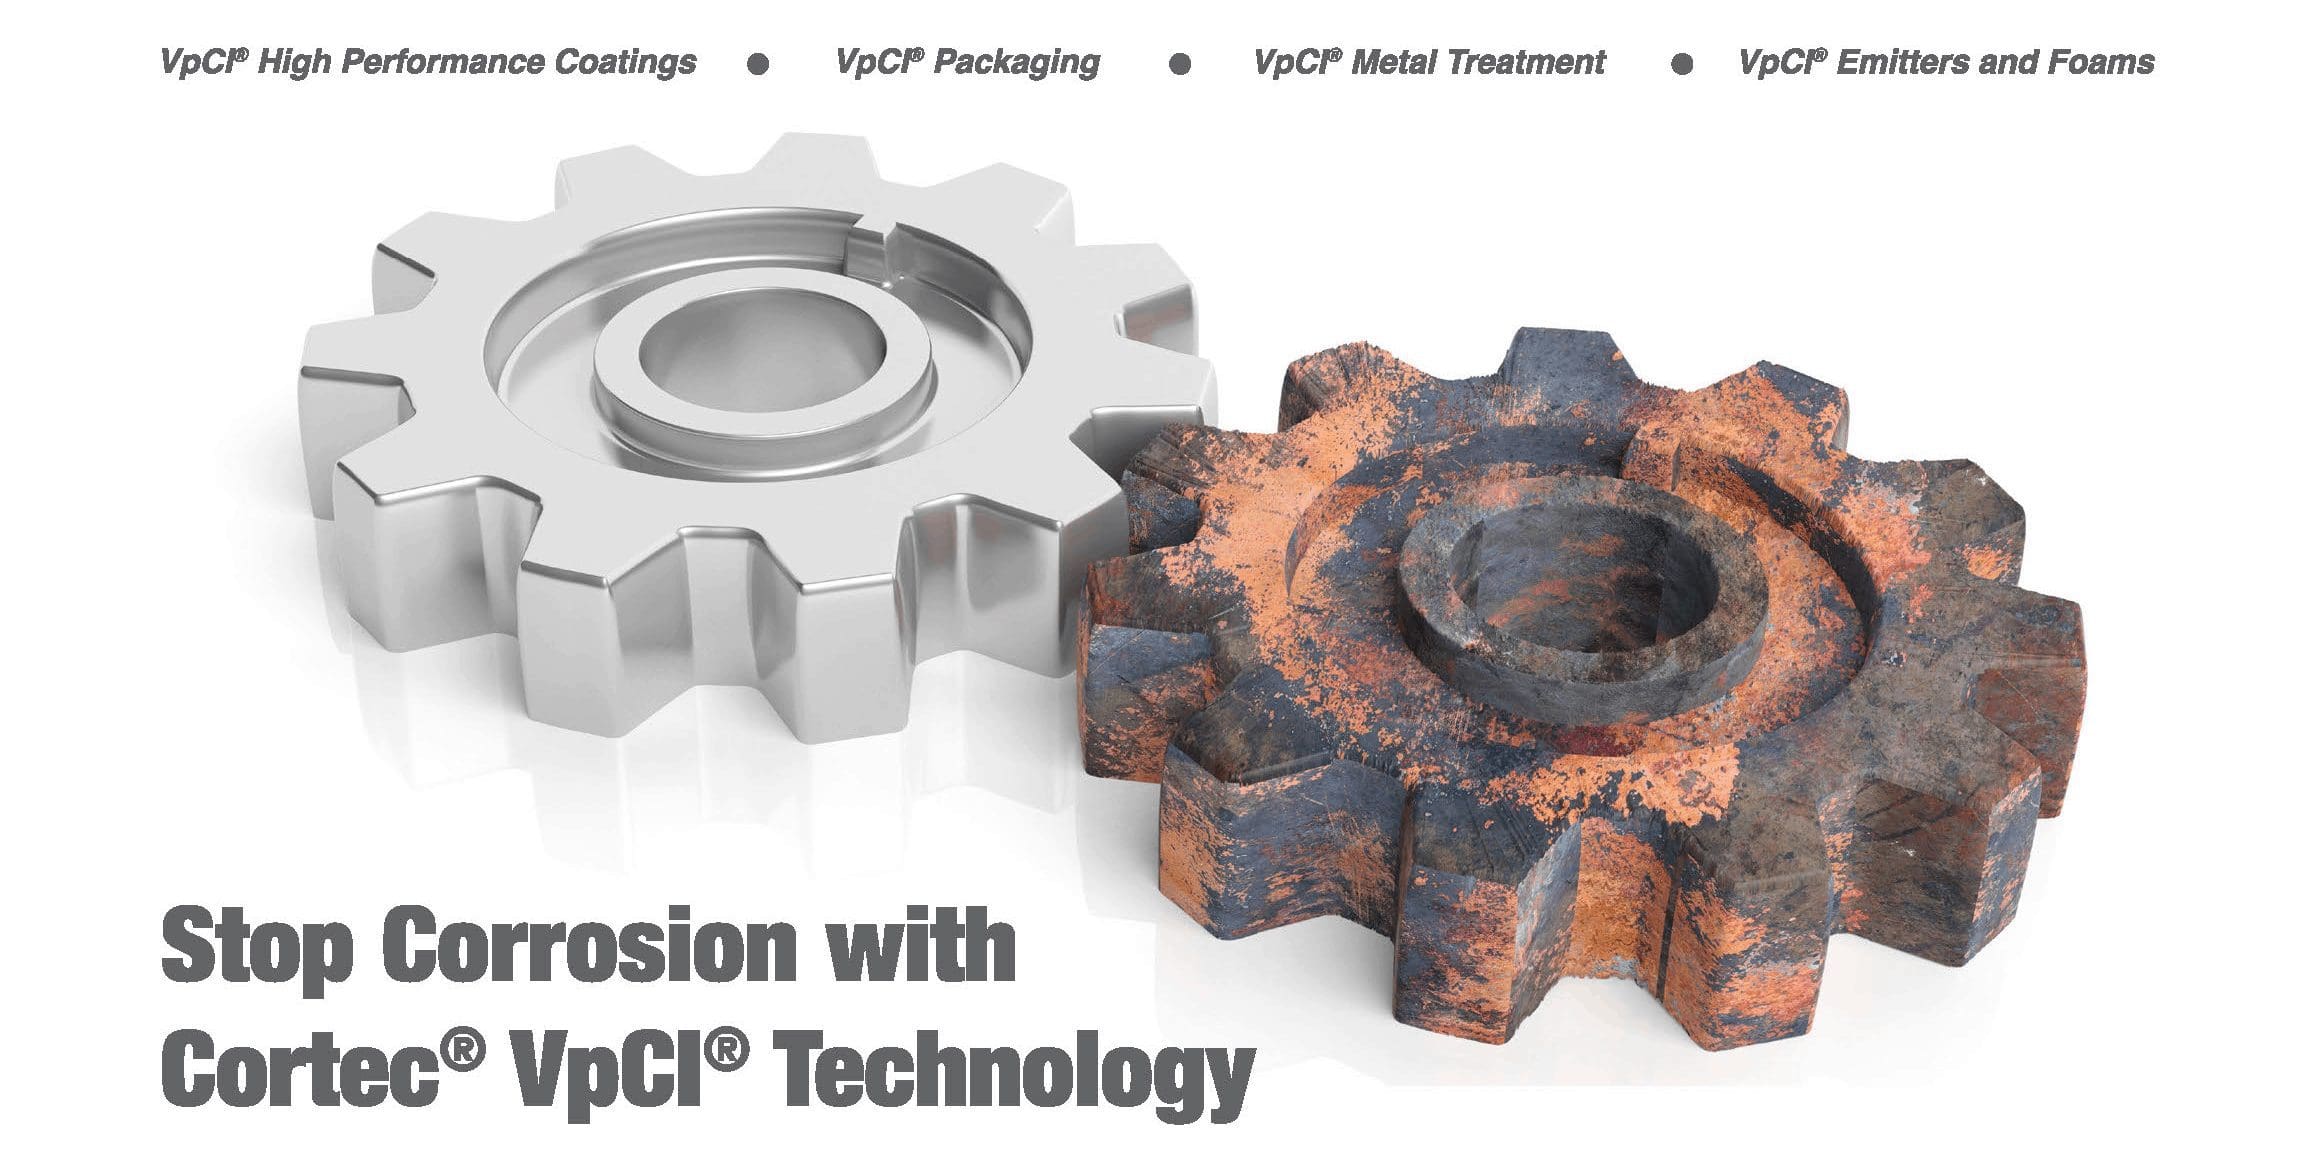 How Does VCI Technology Work?